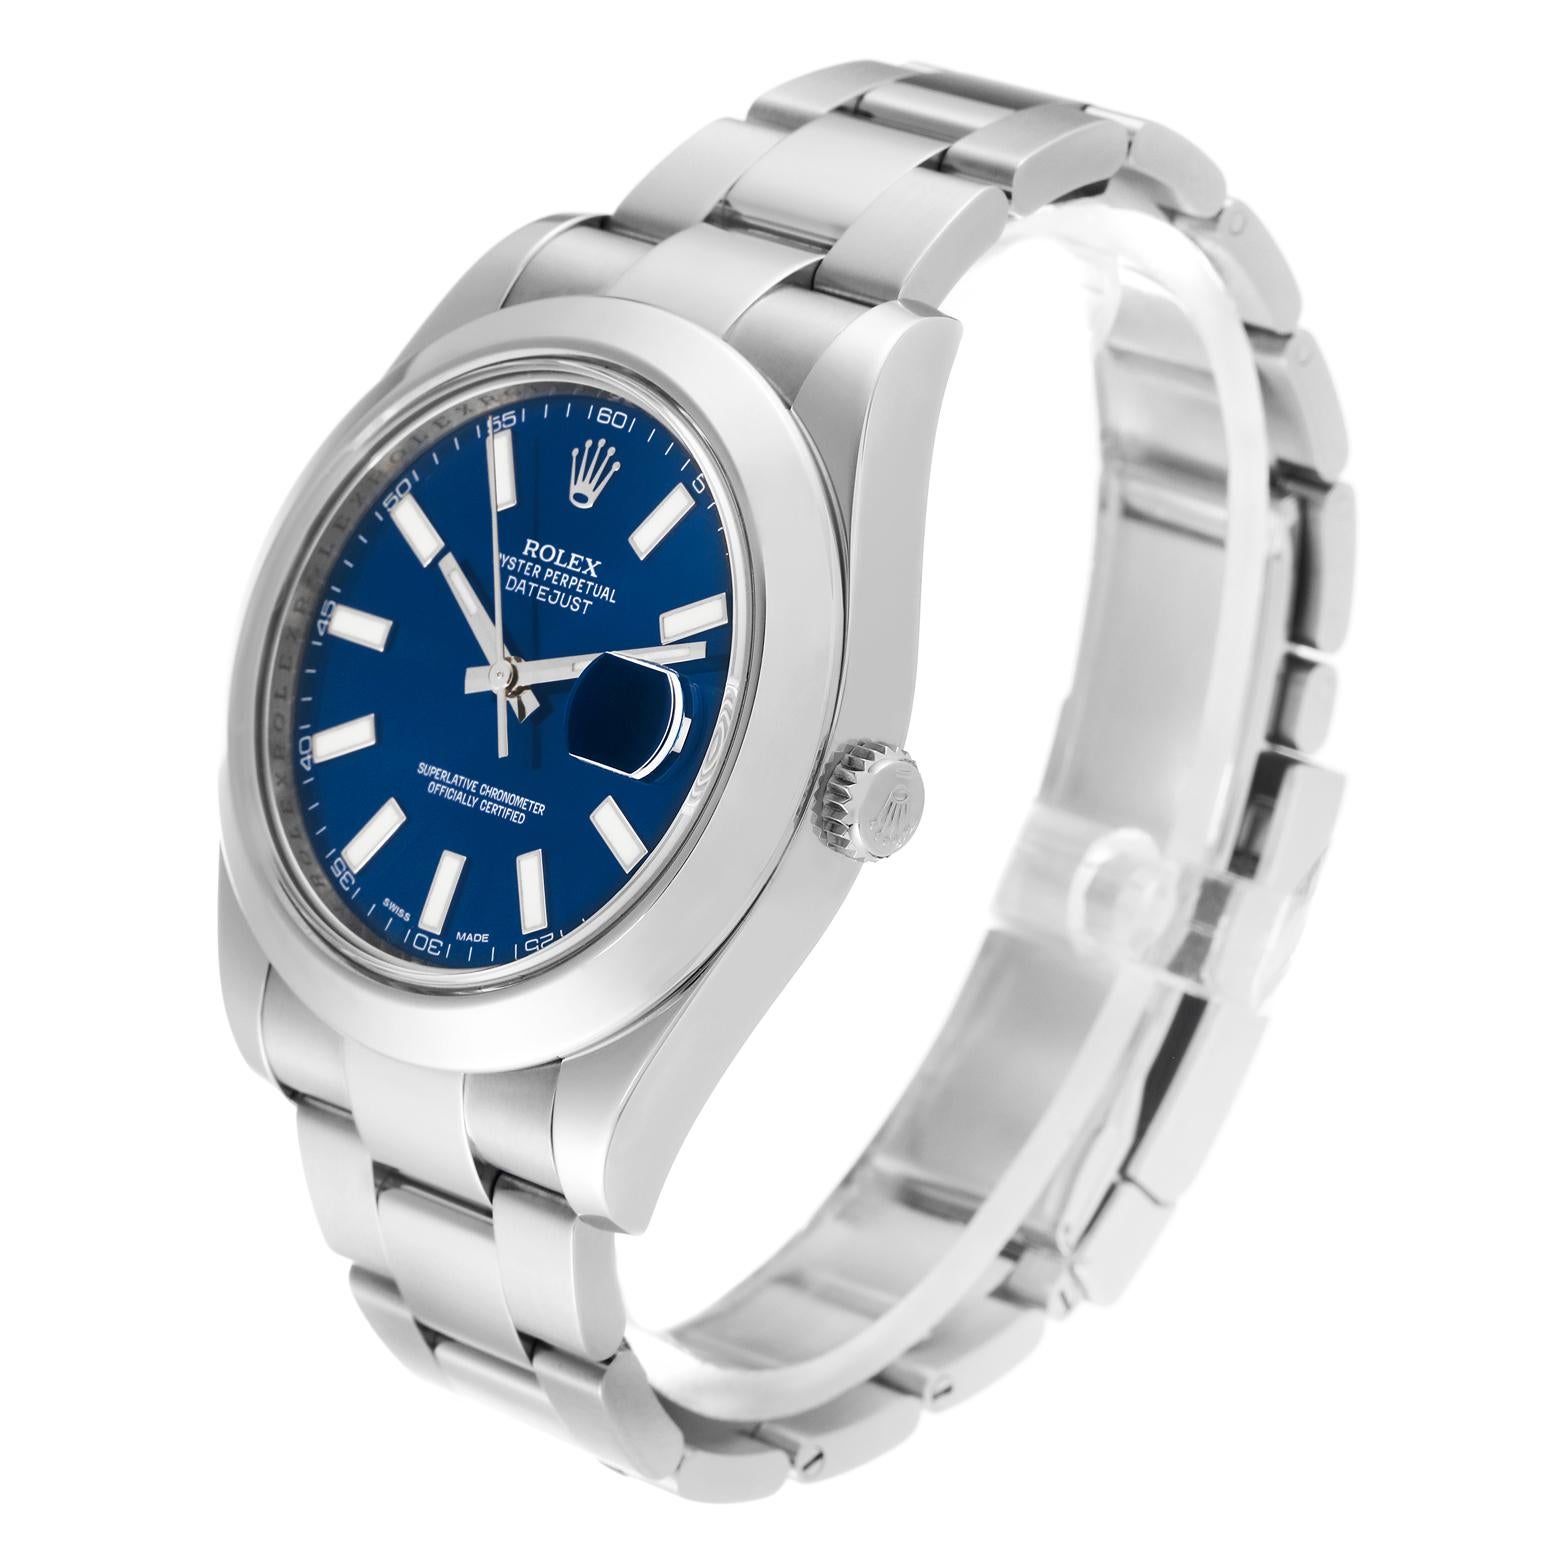 Rolex Datejust II 41 Blue Dial Steel Mens Watch 116300. Officially certified chronometer automatic self-winding movement. Stainless steel case 41 mm in diameter. Rolex logo on the crown. Stainless steel smooth bezel. Scratch resistant sapphire